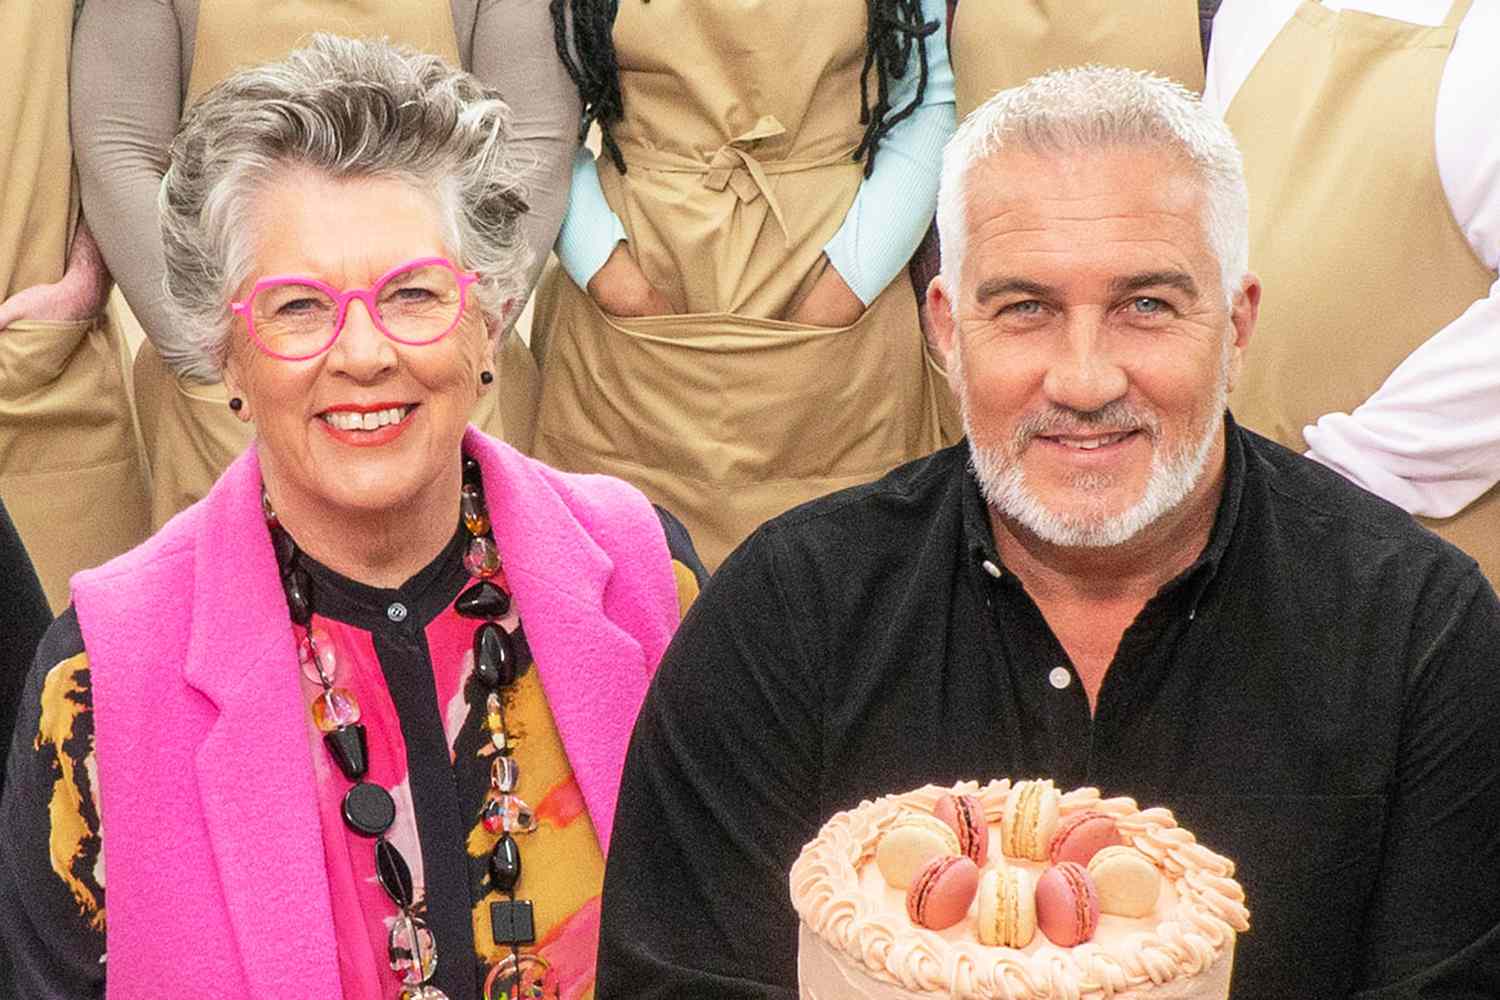 The Great American Baking Show’s Paul Hollywood and Prue Leith Reveal What They Love (and Don’t Love) About Americans